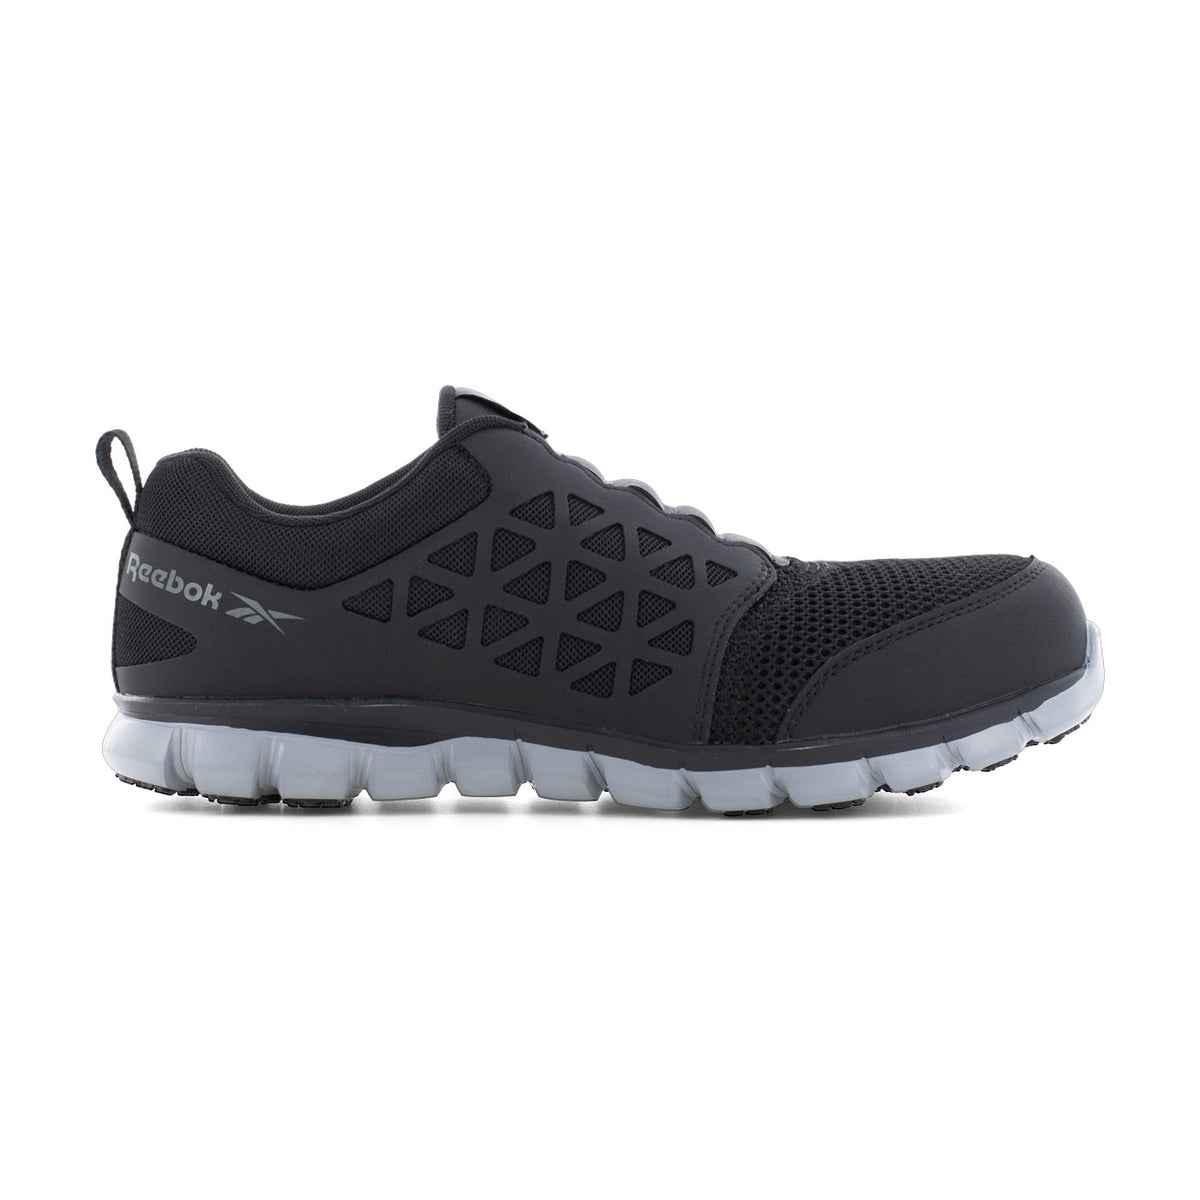 Black Reebok Work Sublite Composite Toe Slip On Work Shoe with a breathable mesh upper and MemoryTech Massage footbed, displayed against a white background.